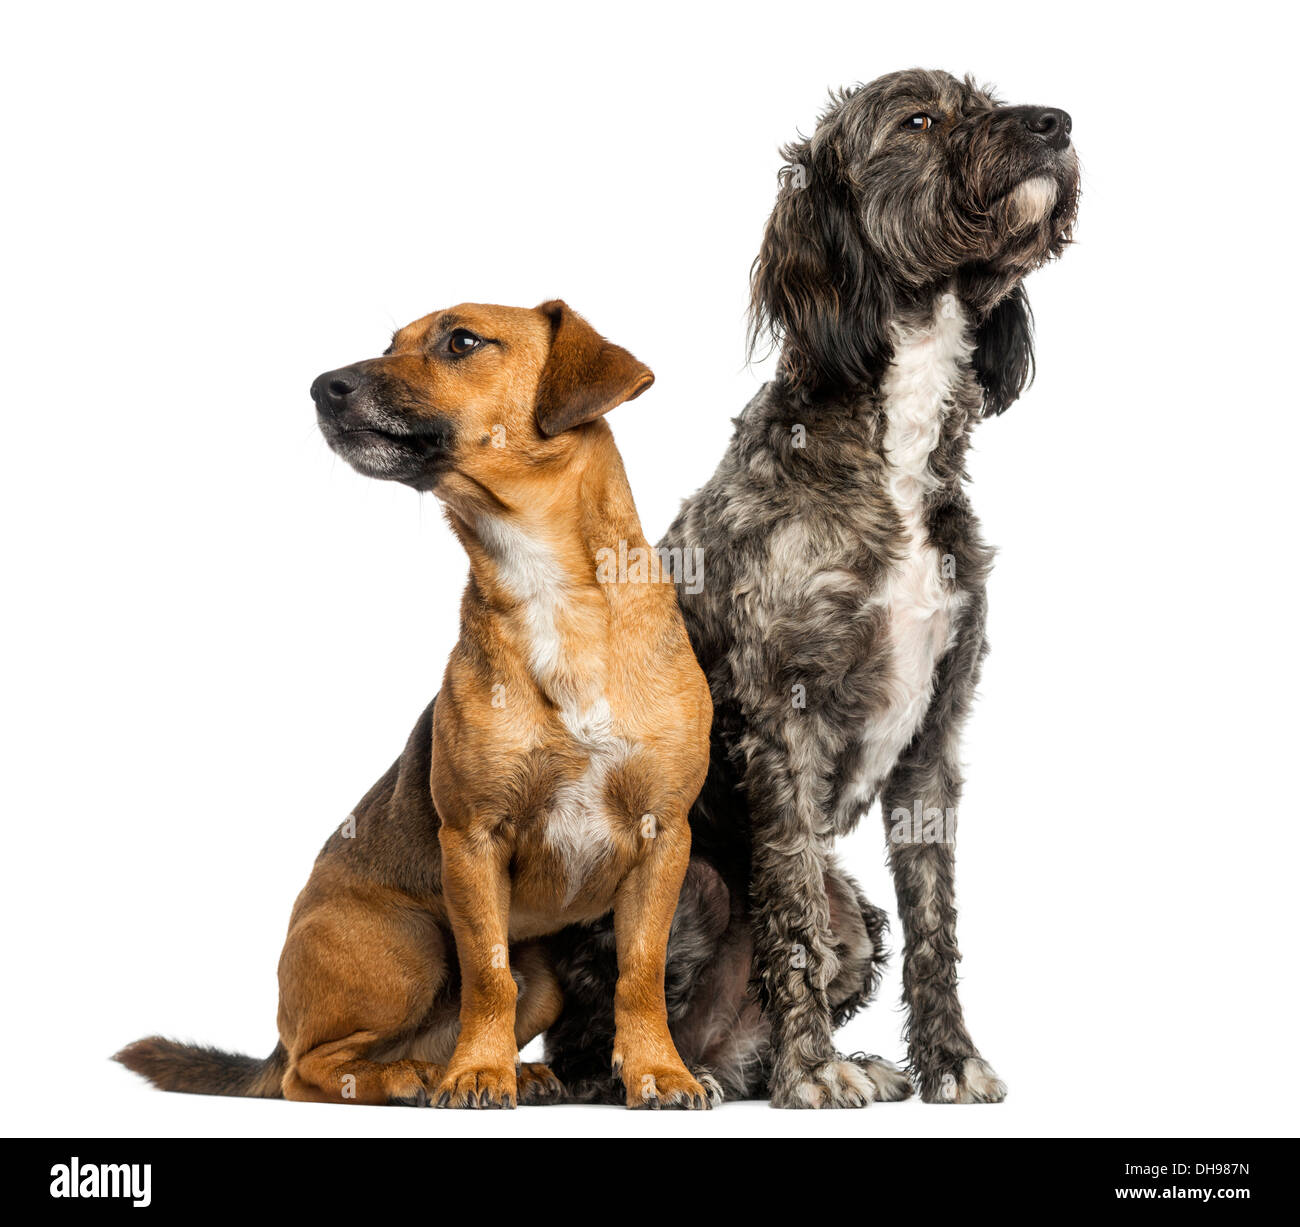 Brittany Briard crossbreed dog and Jack Russell sitting together against white background Stock Photo